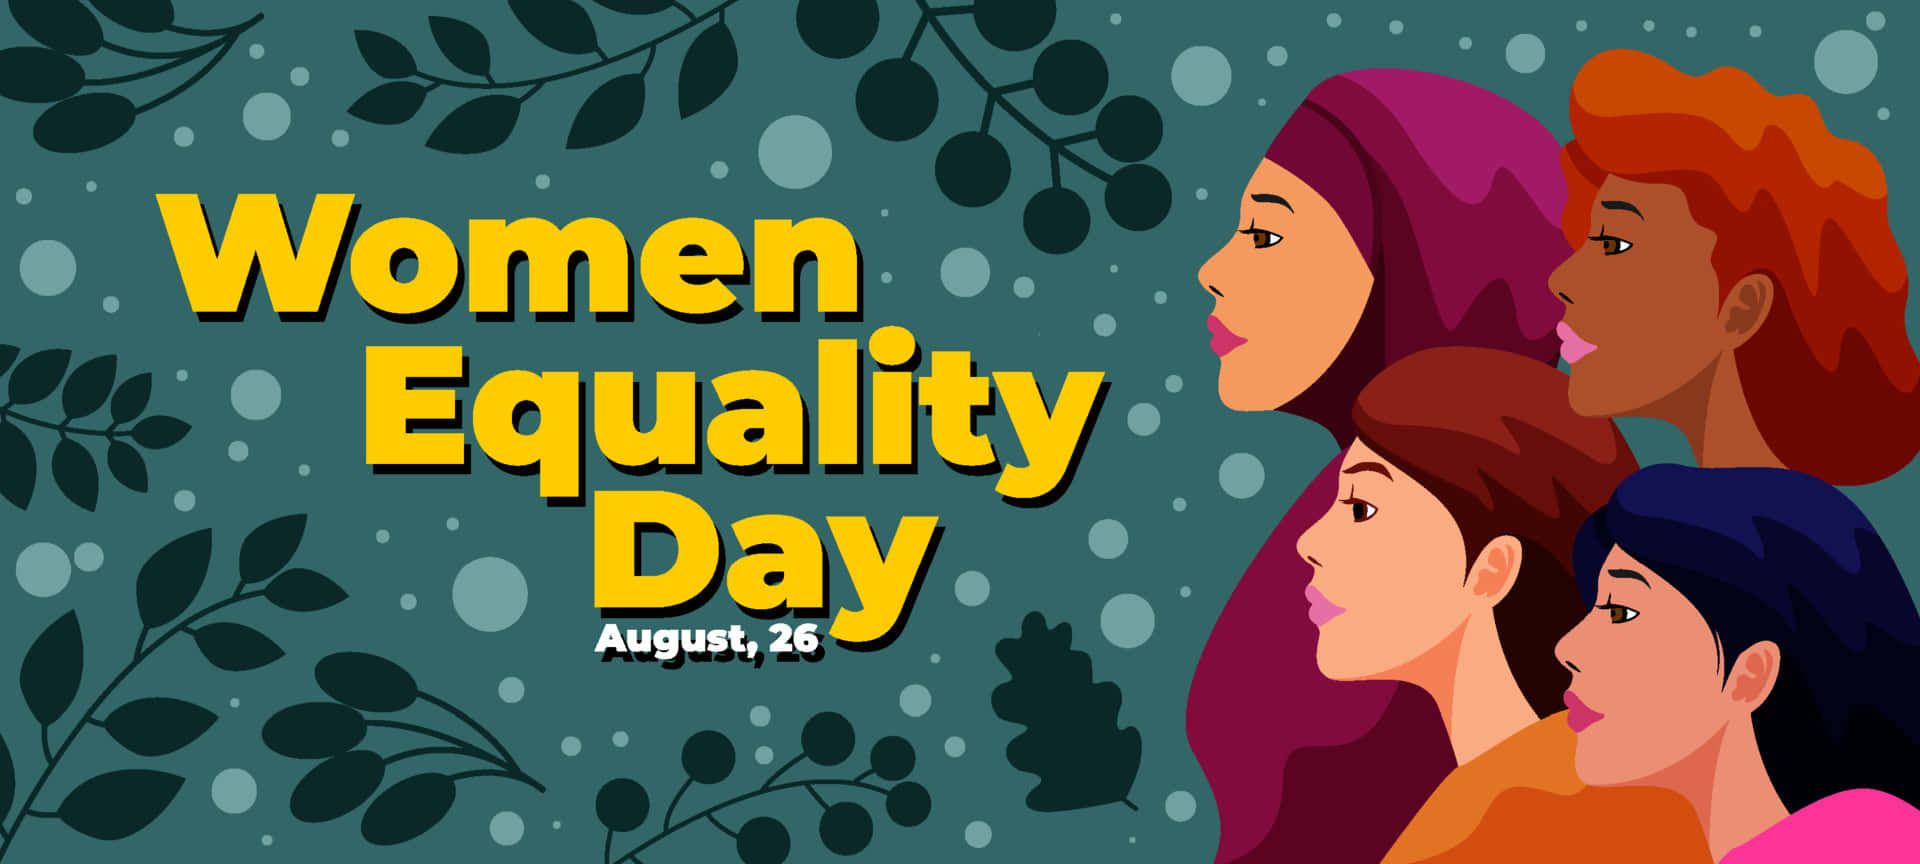 Celebrating Women's Equality Day Wallpaper